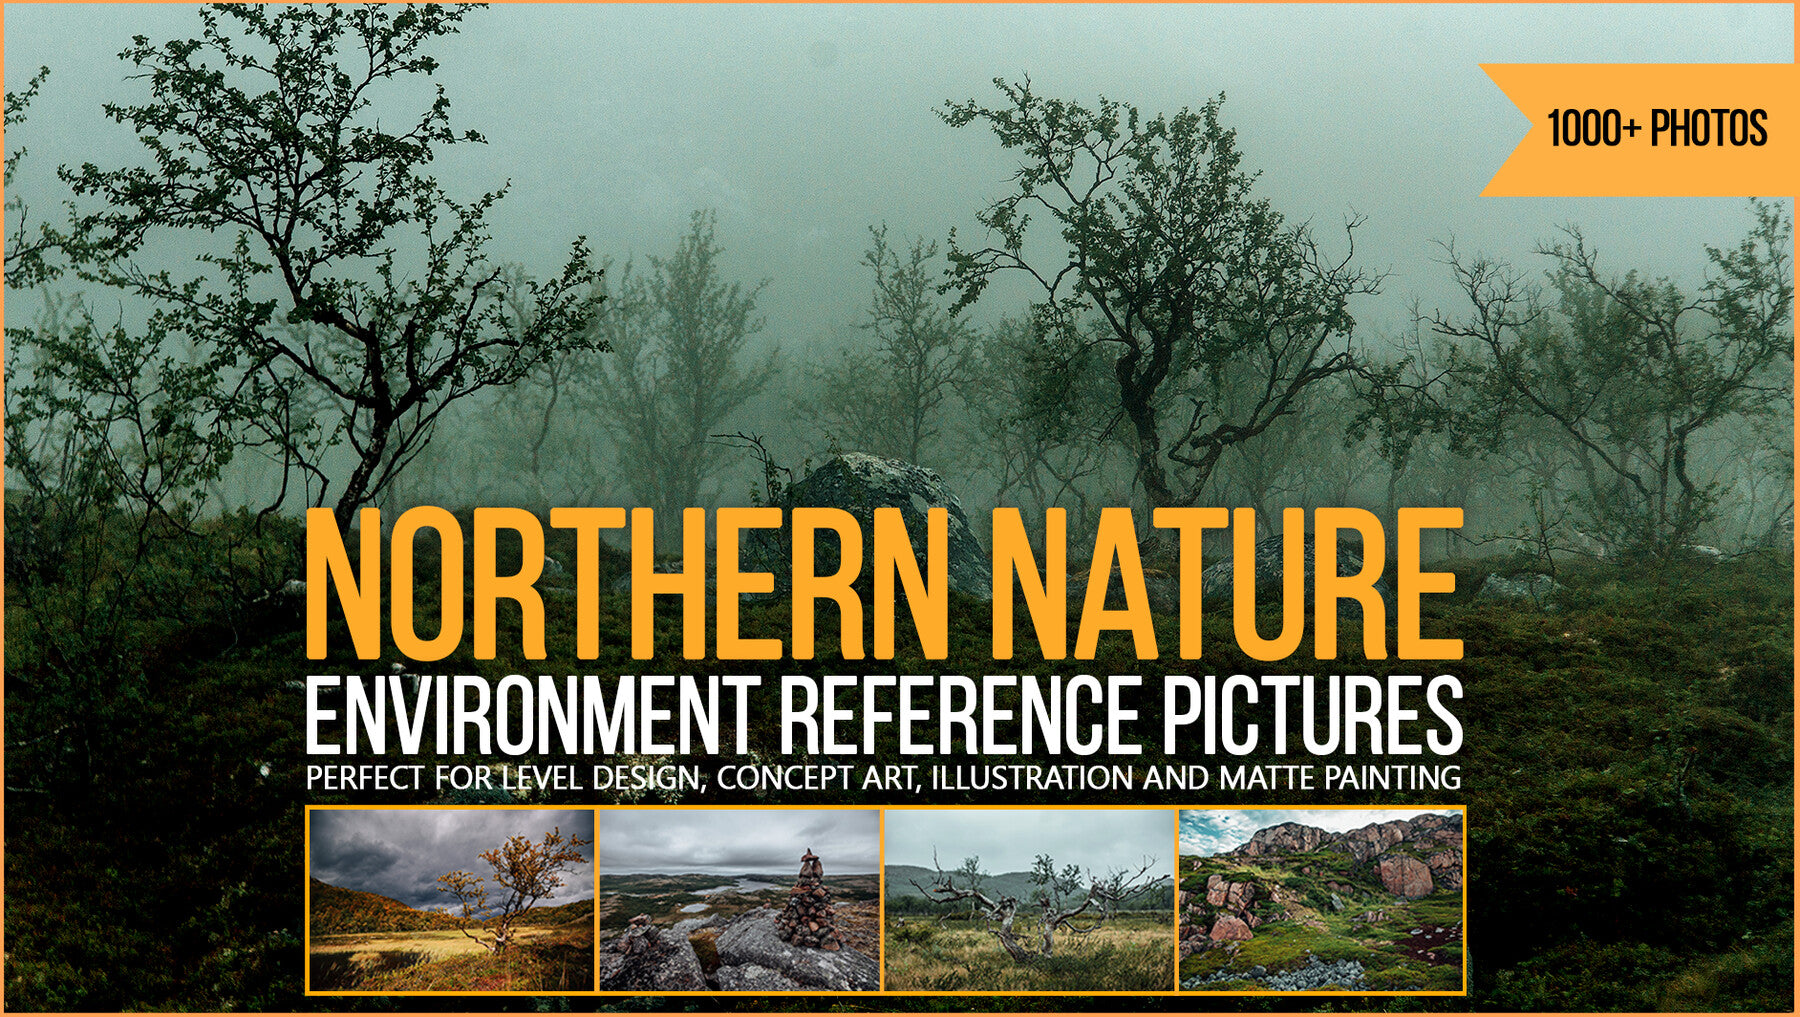 1000+ Northern Nature Environment Reference Pictures